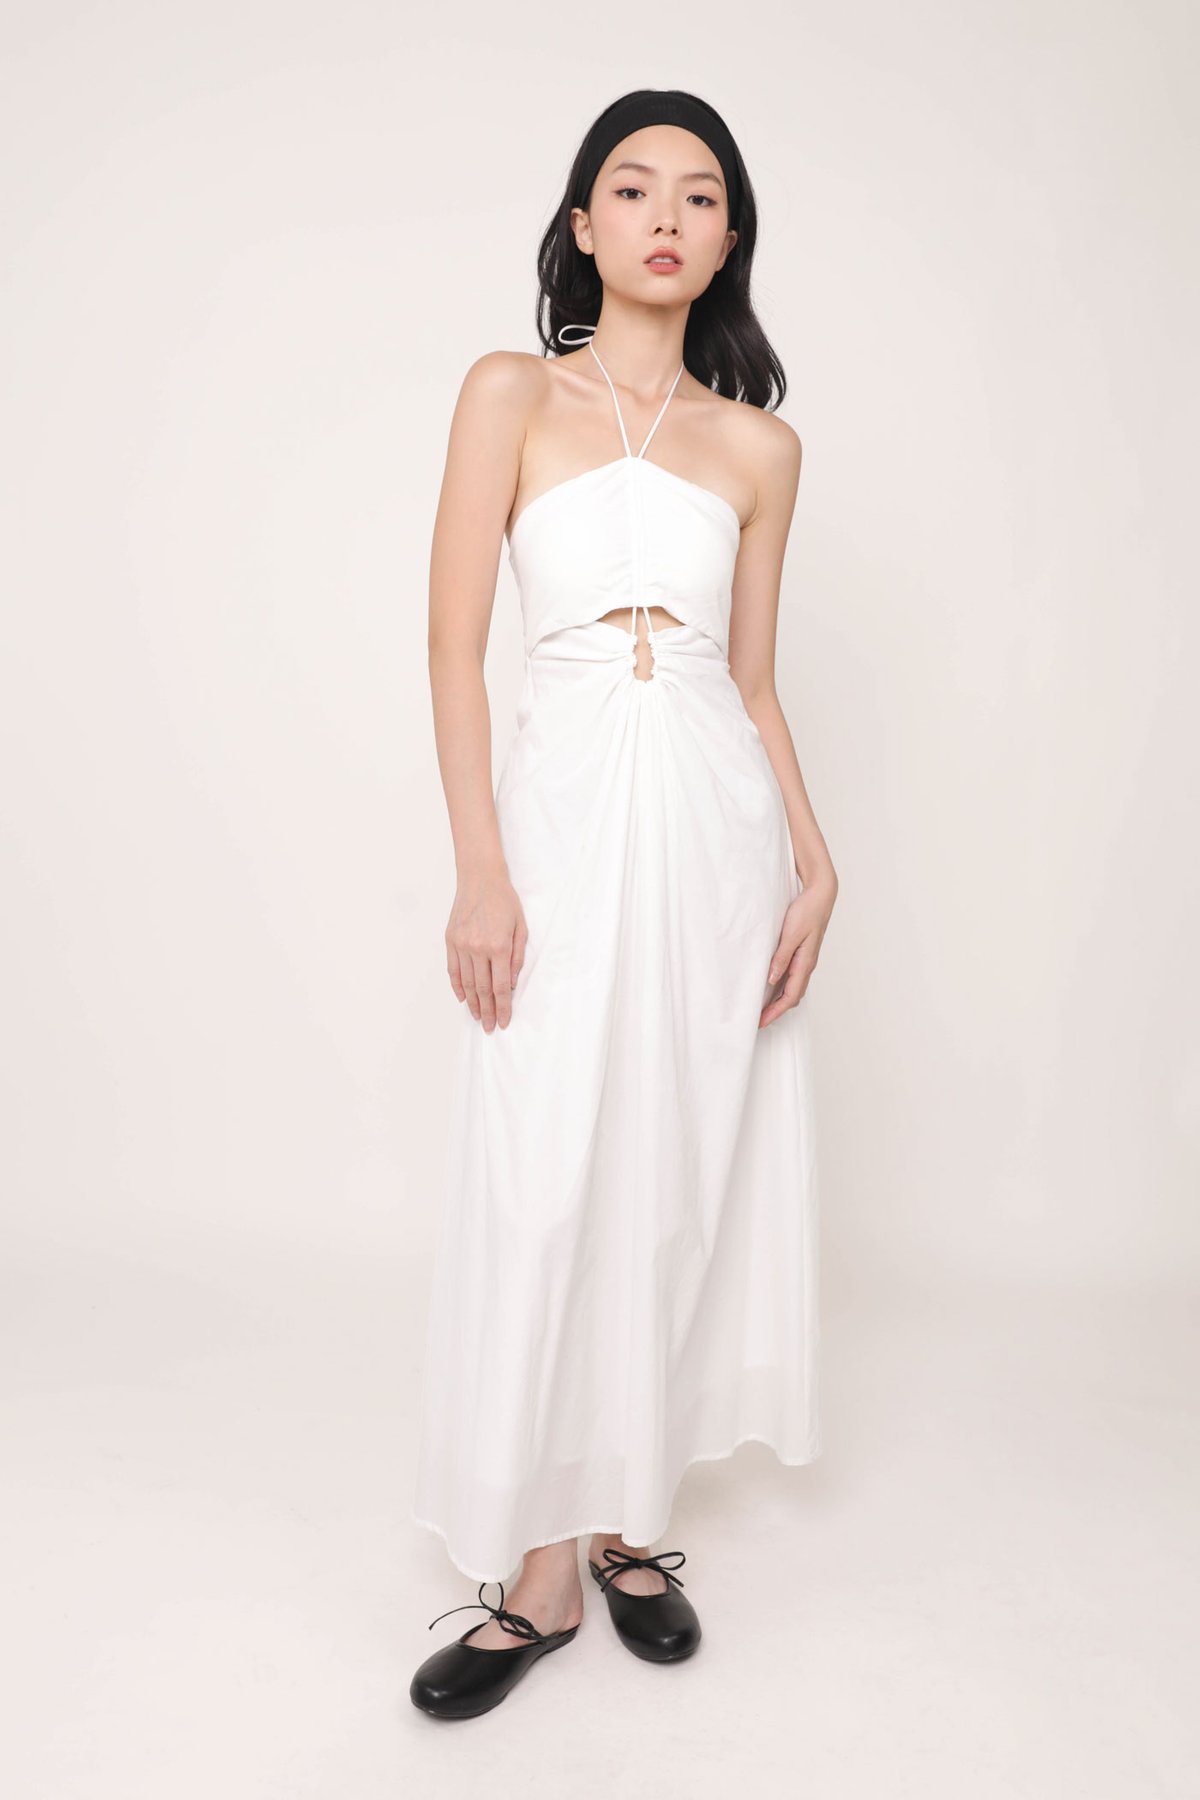 Meia Halter Ruched Padded Dress (White)